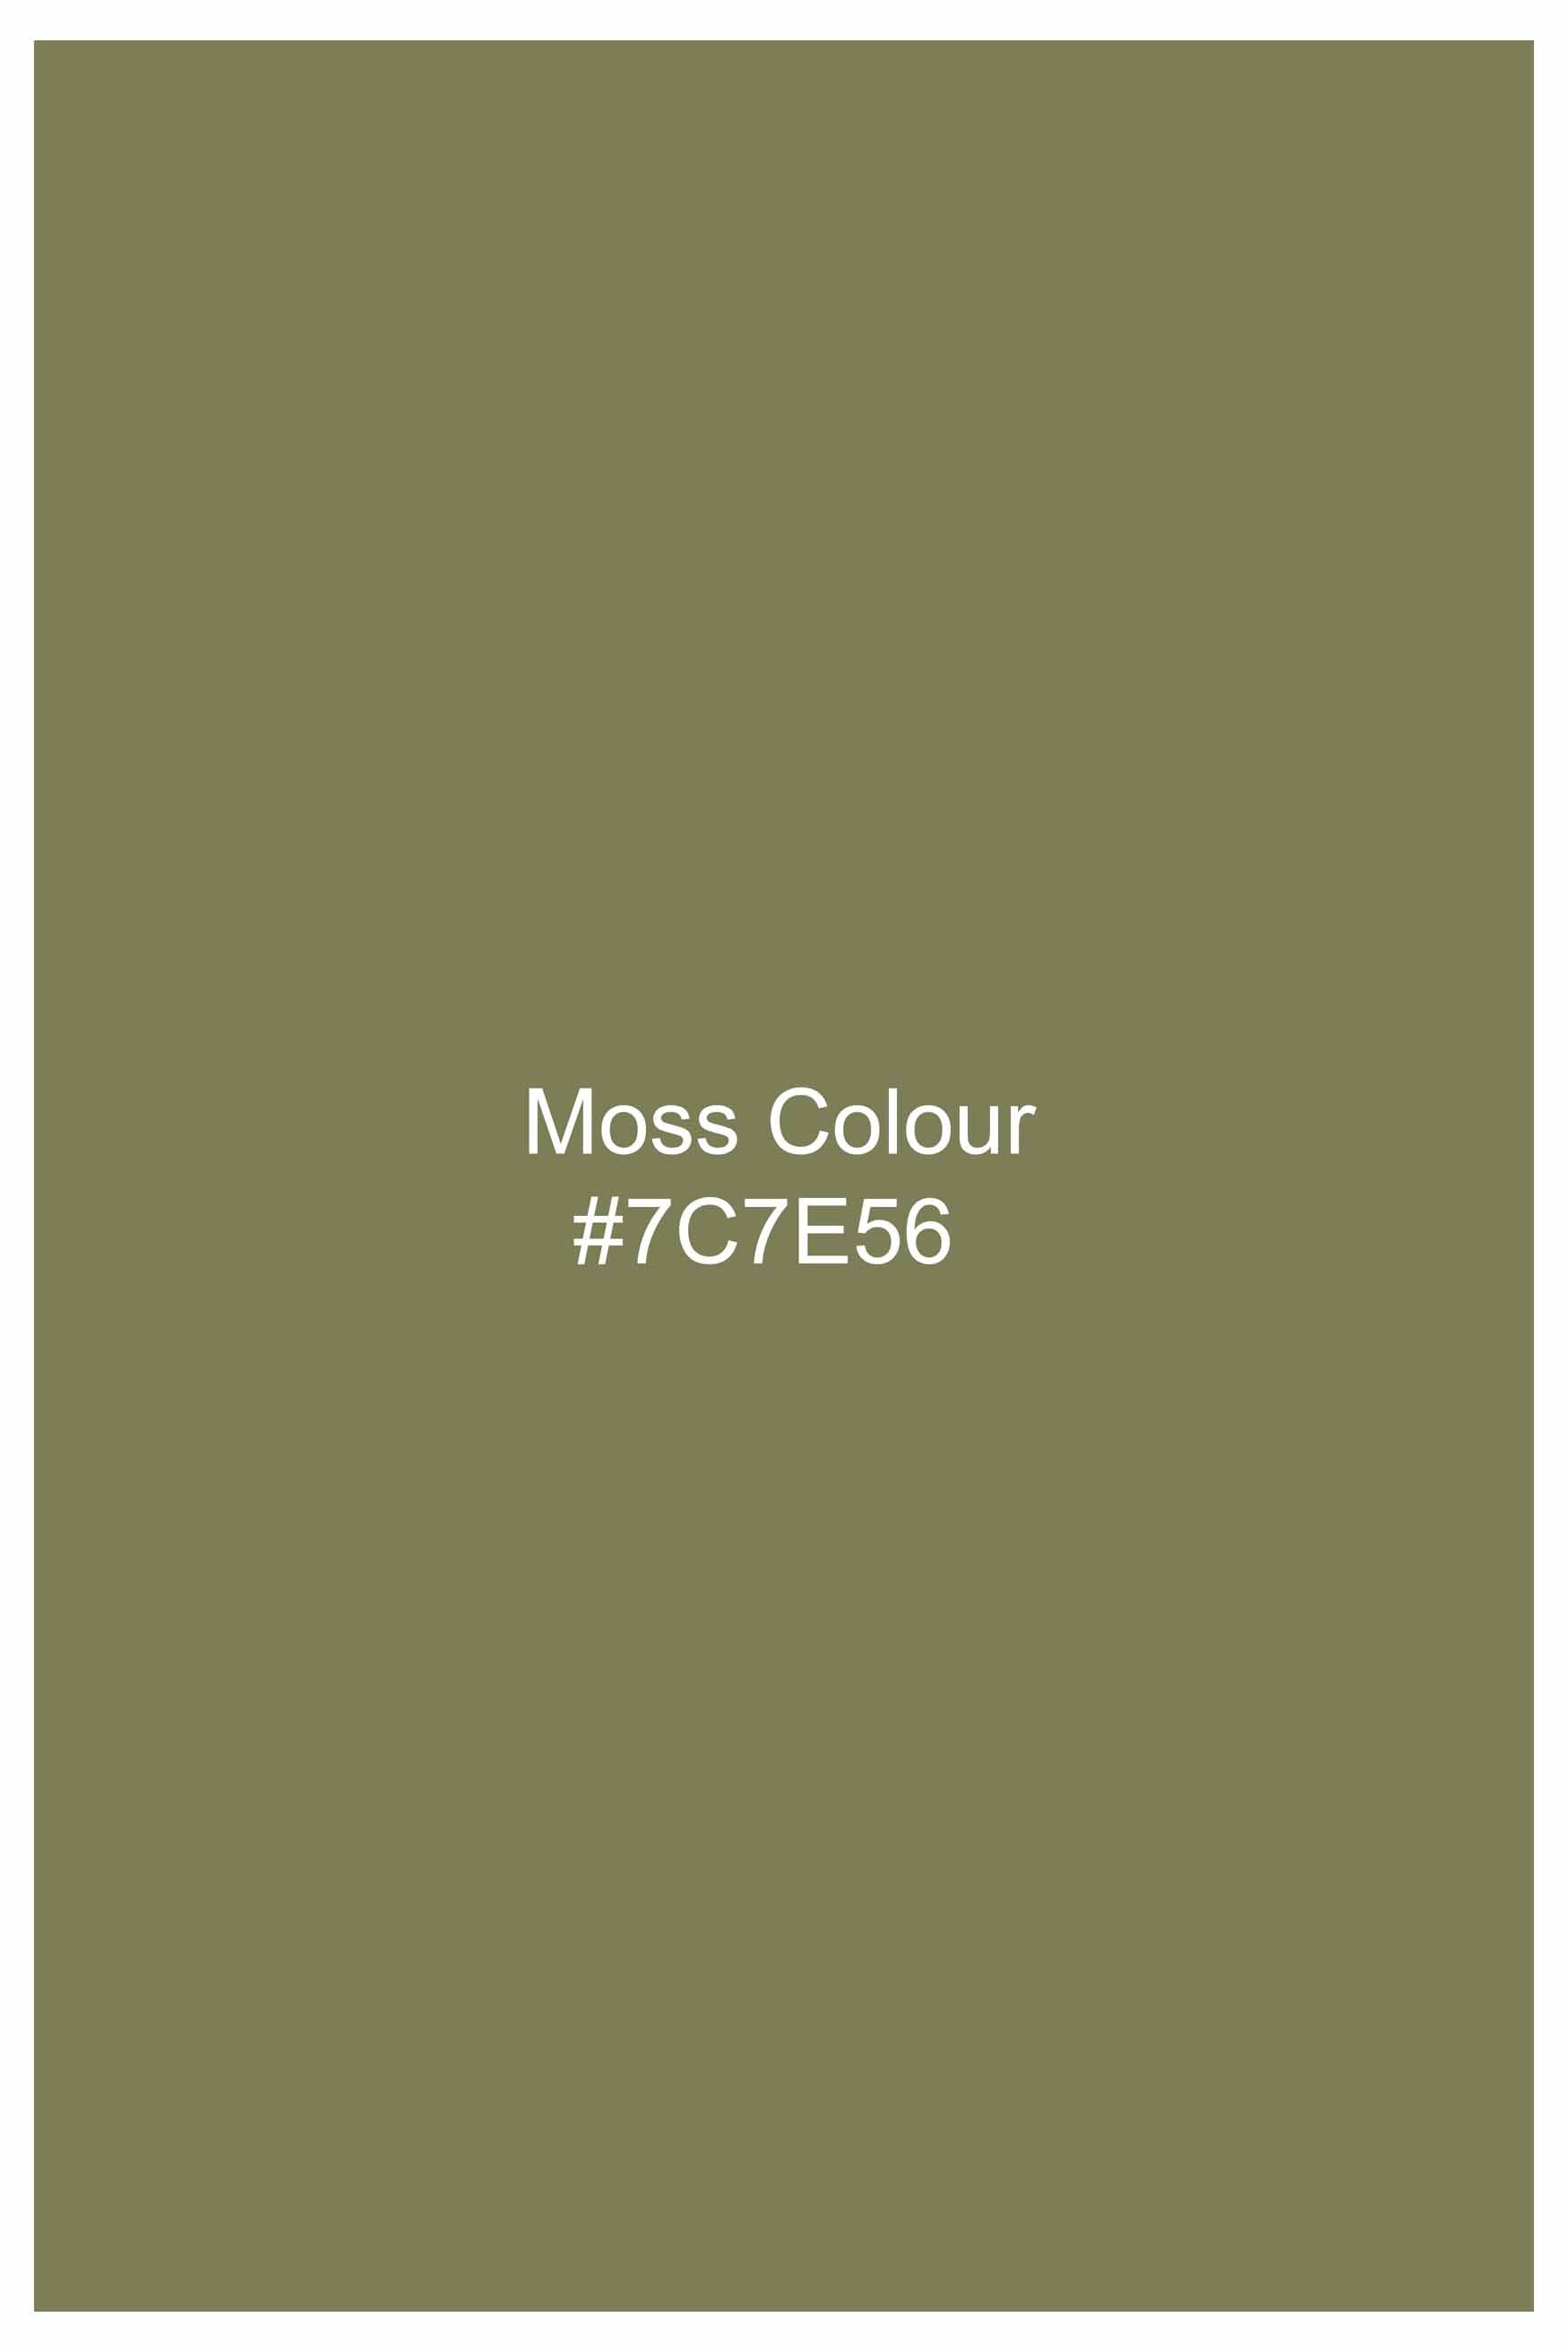 Moss Green Hand Painted Royal Oxford Designer Shirt 6265-BD-ART-38, 6265-BD-ART-H-38, 6265-BD-ART-39, 6265-BD-ART-H-39, 6265-BD-ART-40, 6265-BD-ART-H-40, 6265-BD-ART-42, 6265-BD-ART-H-42, 6265-BD-ART-44, 6265-BD-ART-H-44, 6265-BD-ART-46, 6265-BD-ART-H-46, 6265-BD-ART-48, 6265-BD-ART-H-48, 6265-BD-ART-50, 6265-BD-ART-H-50, 6265-BD-ART-52, 6265-BD-ART-H-52